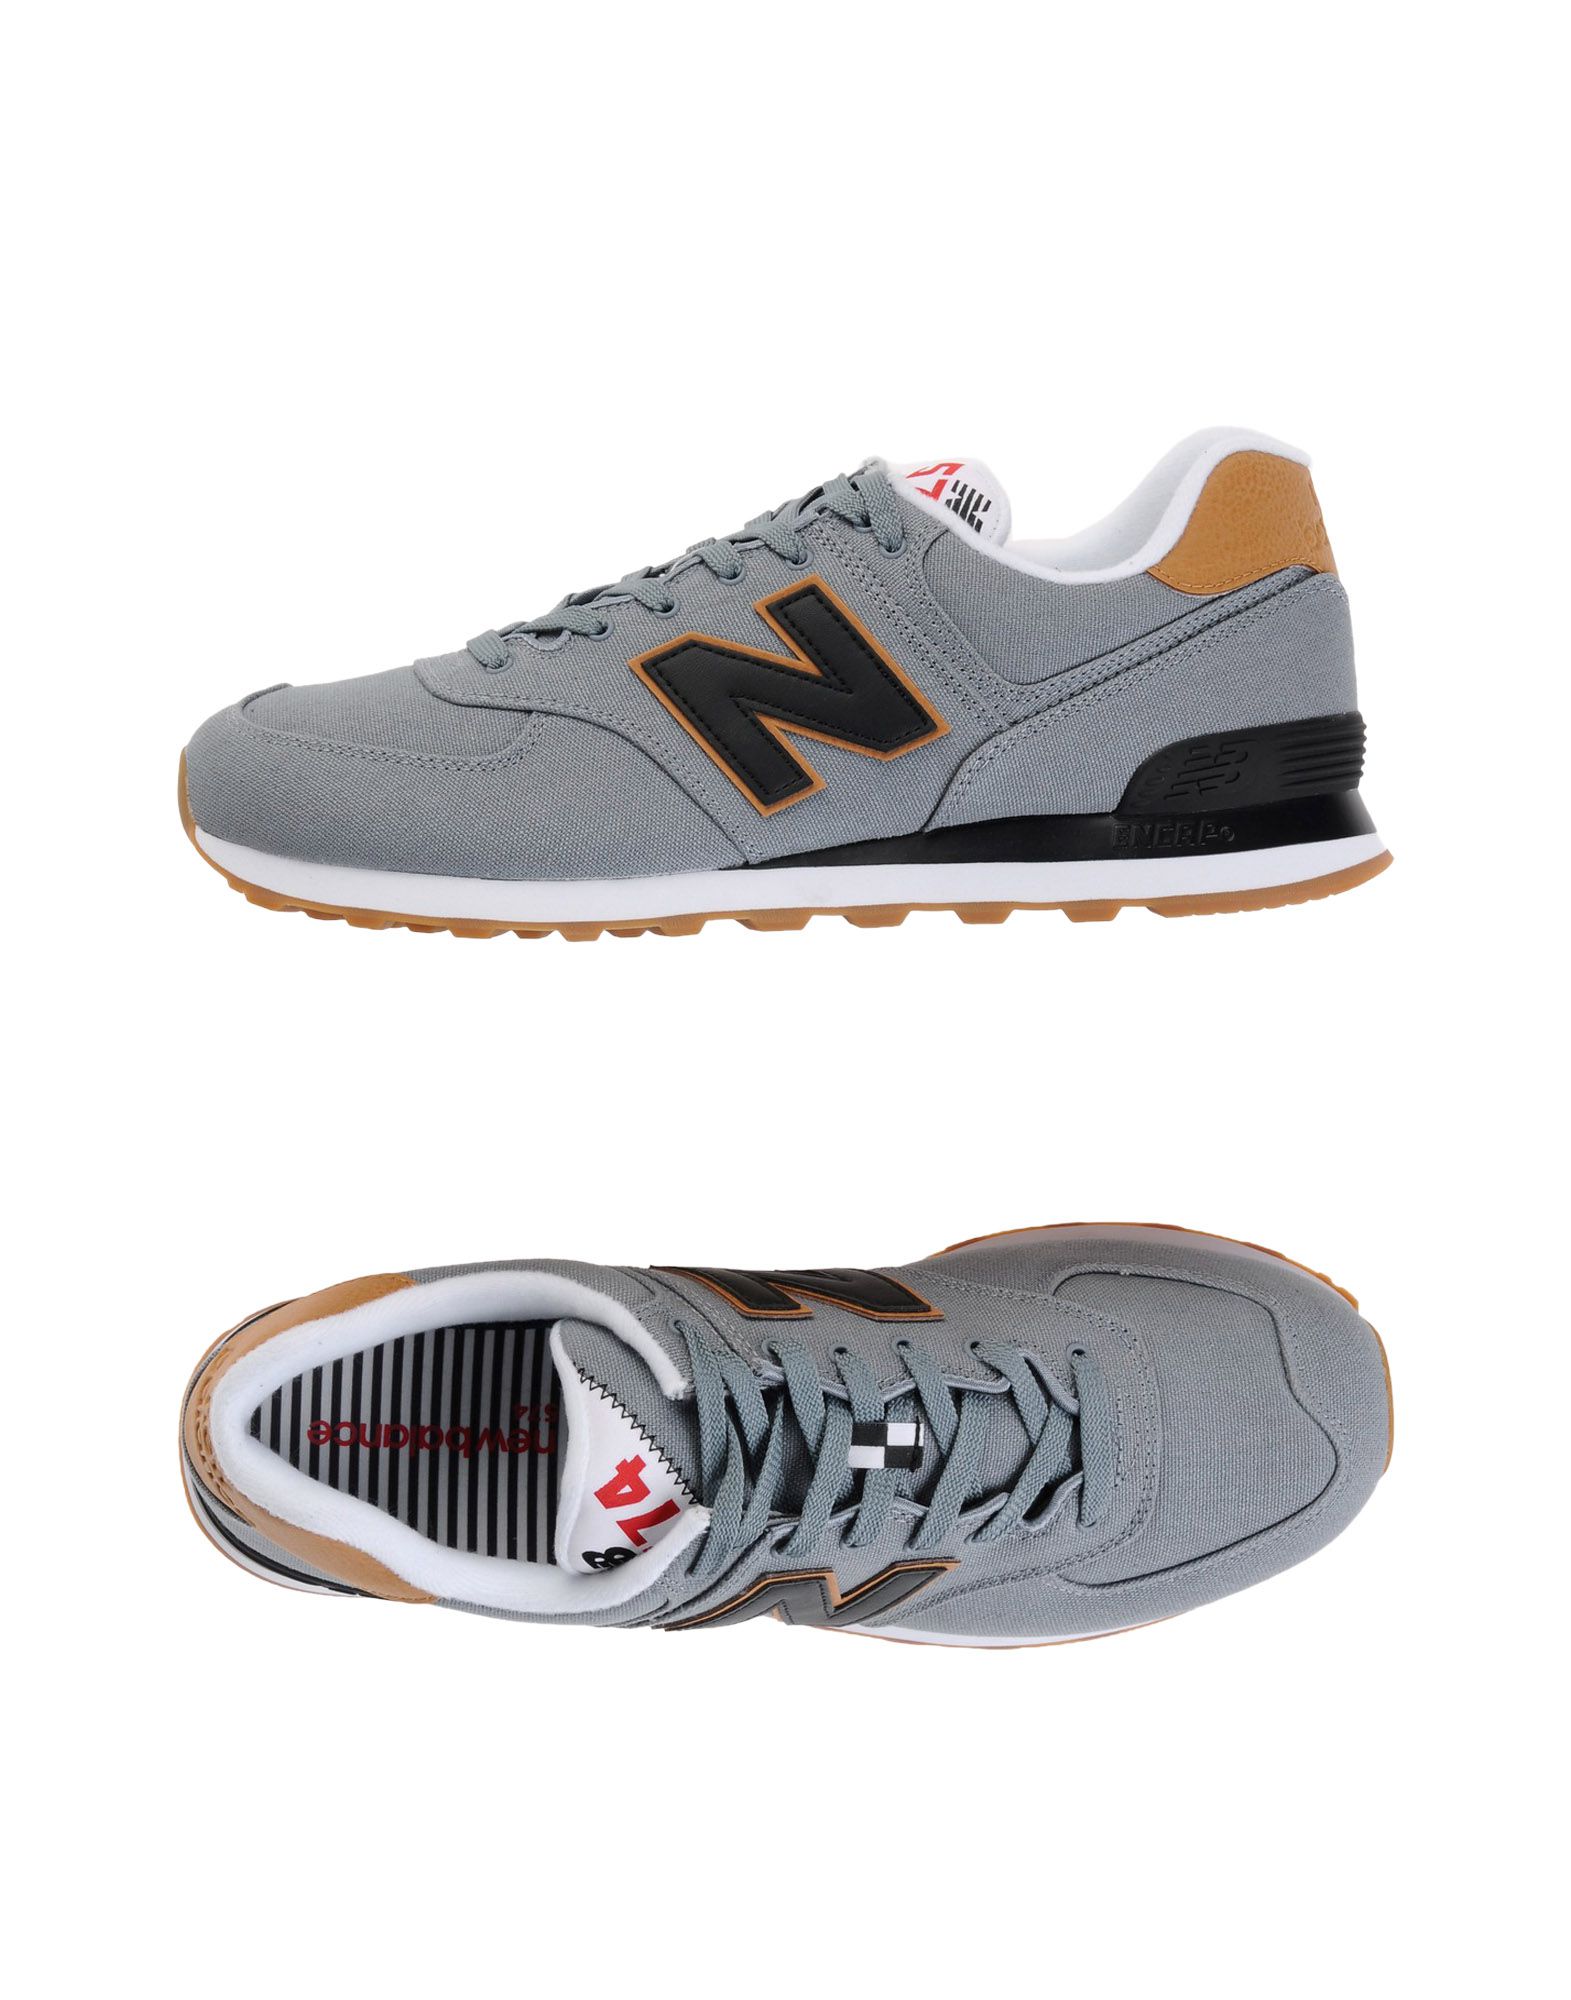 mens new balance 574 yacht club casual shoes